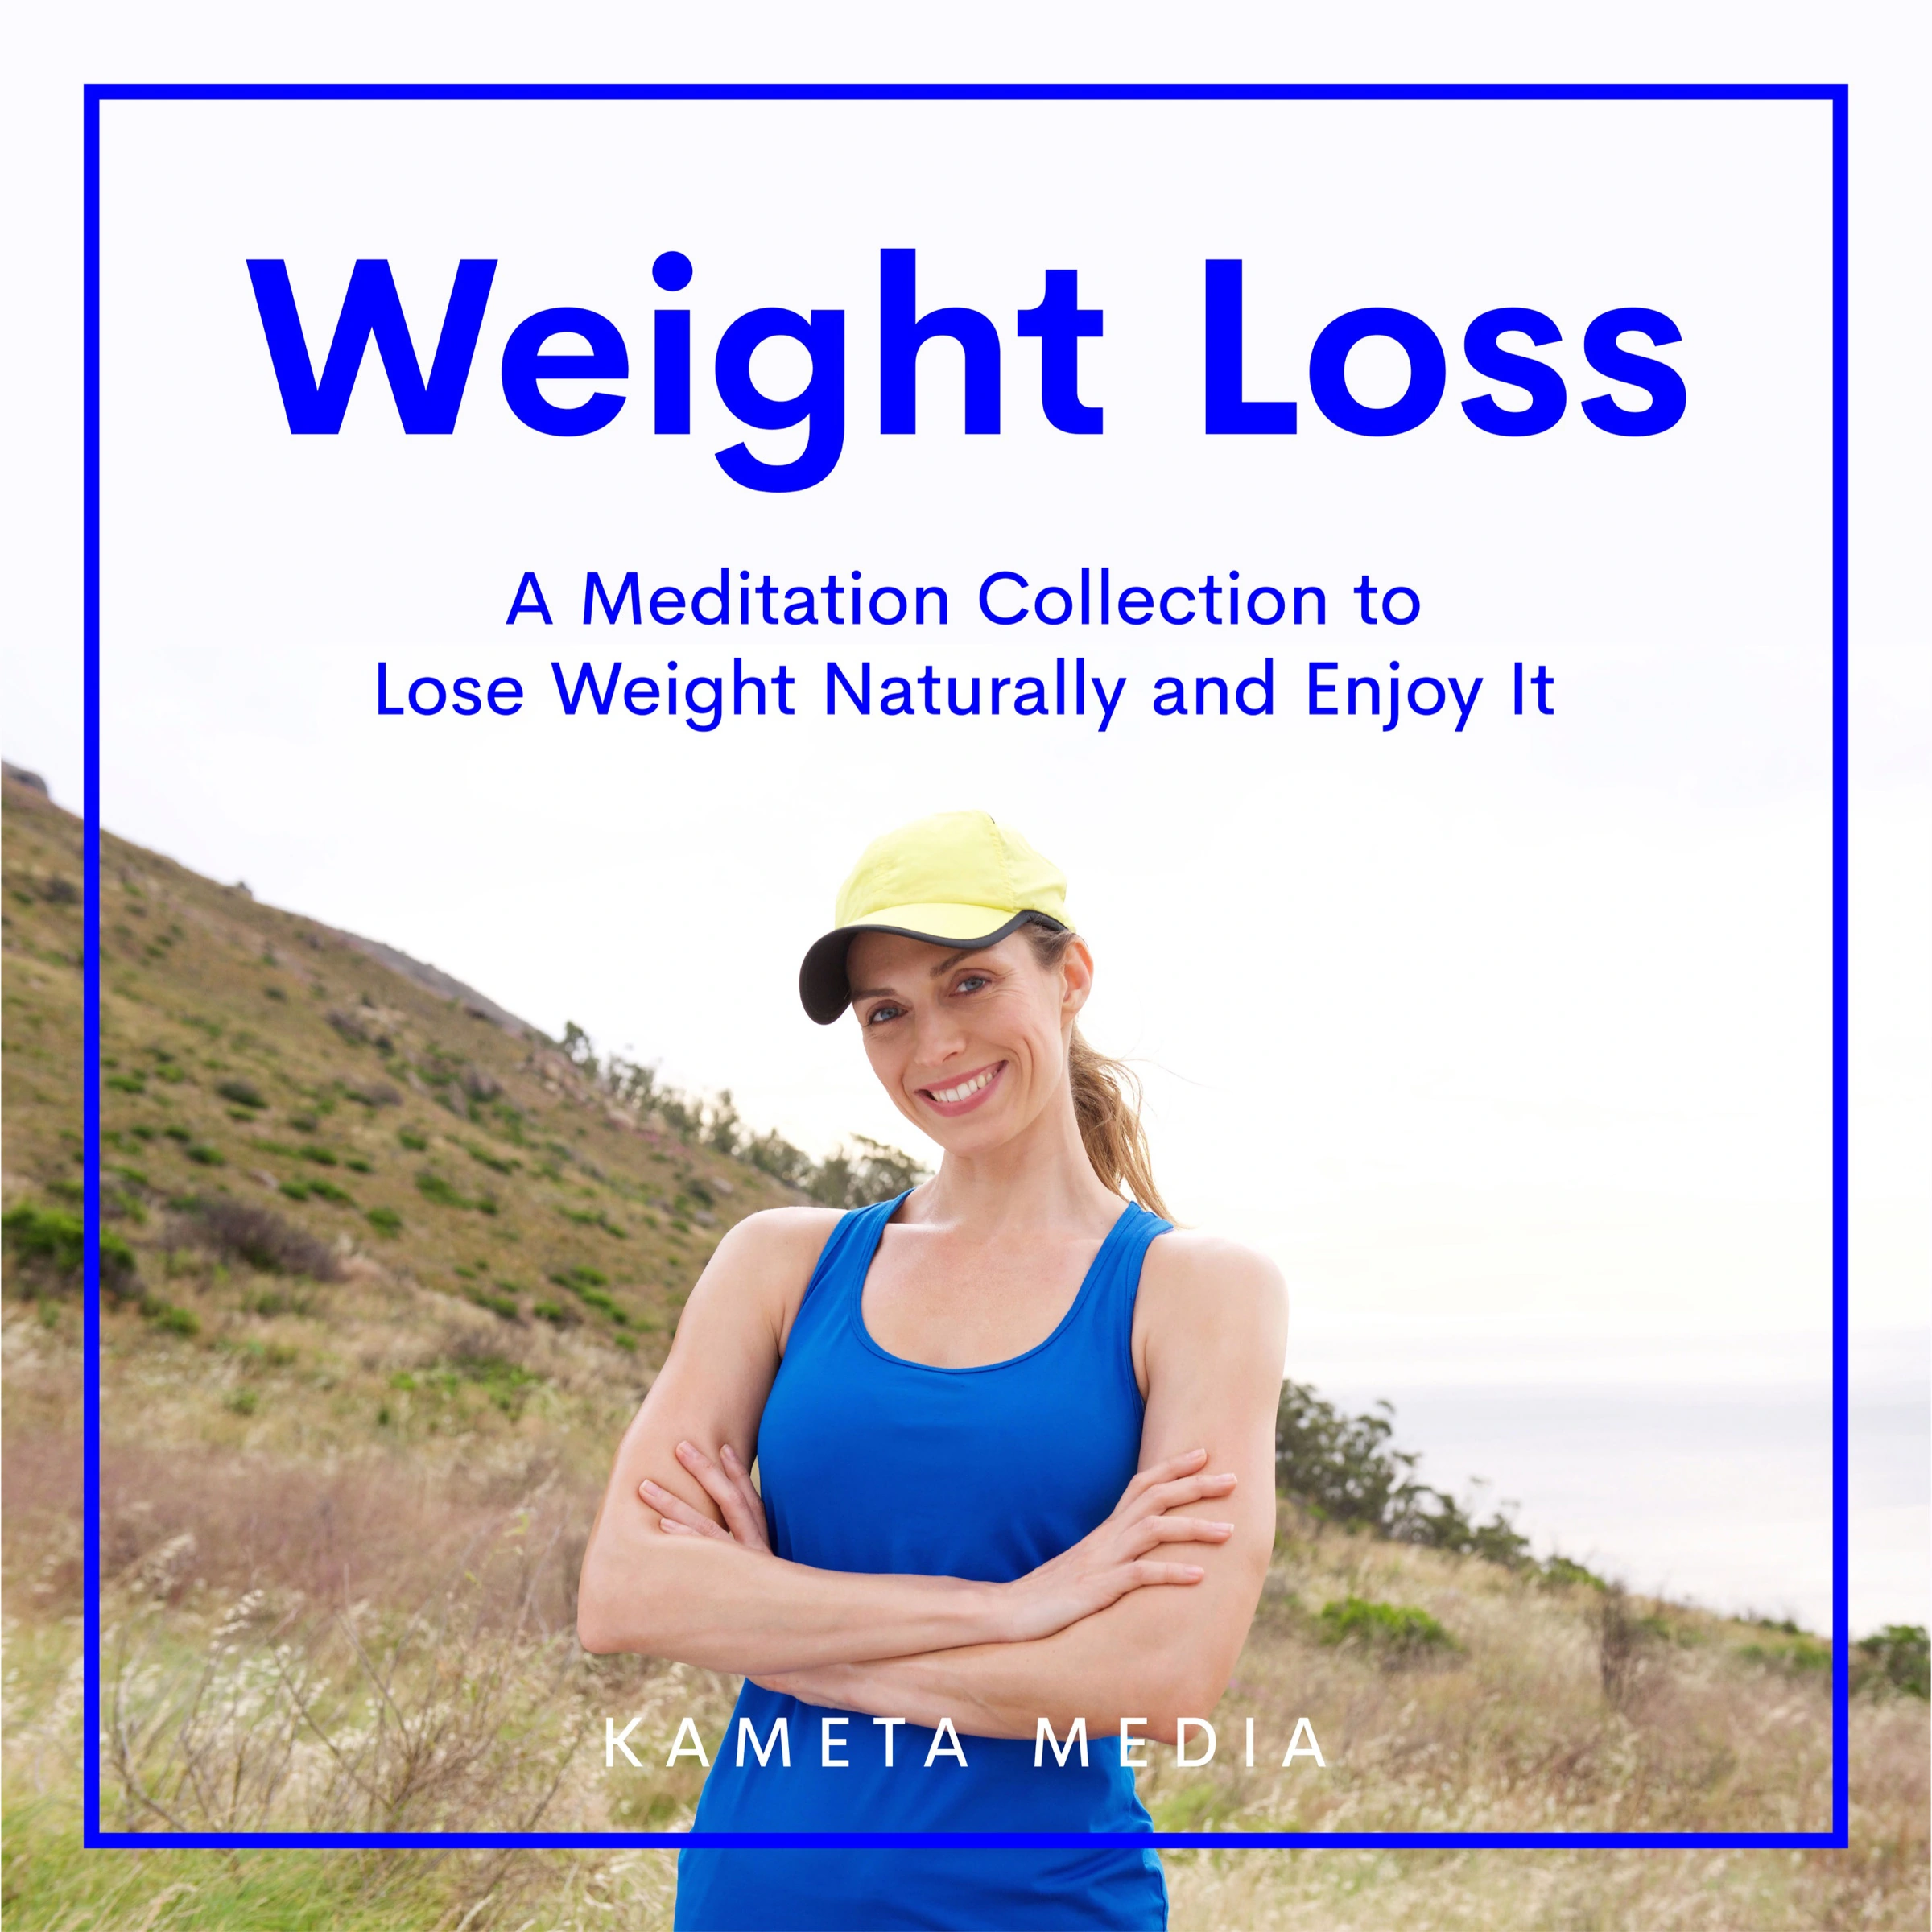 Weight Loss: A Meditation Collection to Lose Weight Naturally and Enjoy It Audiobook by Kameta Media